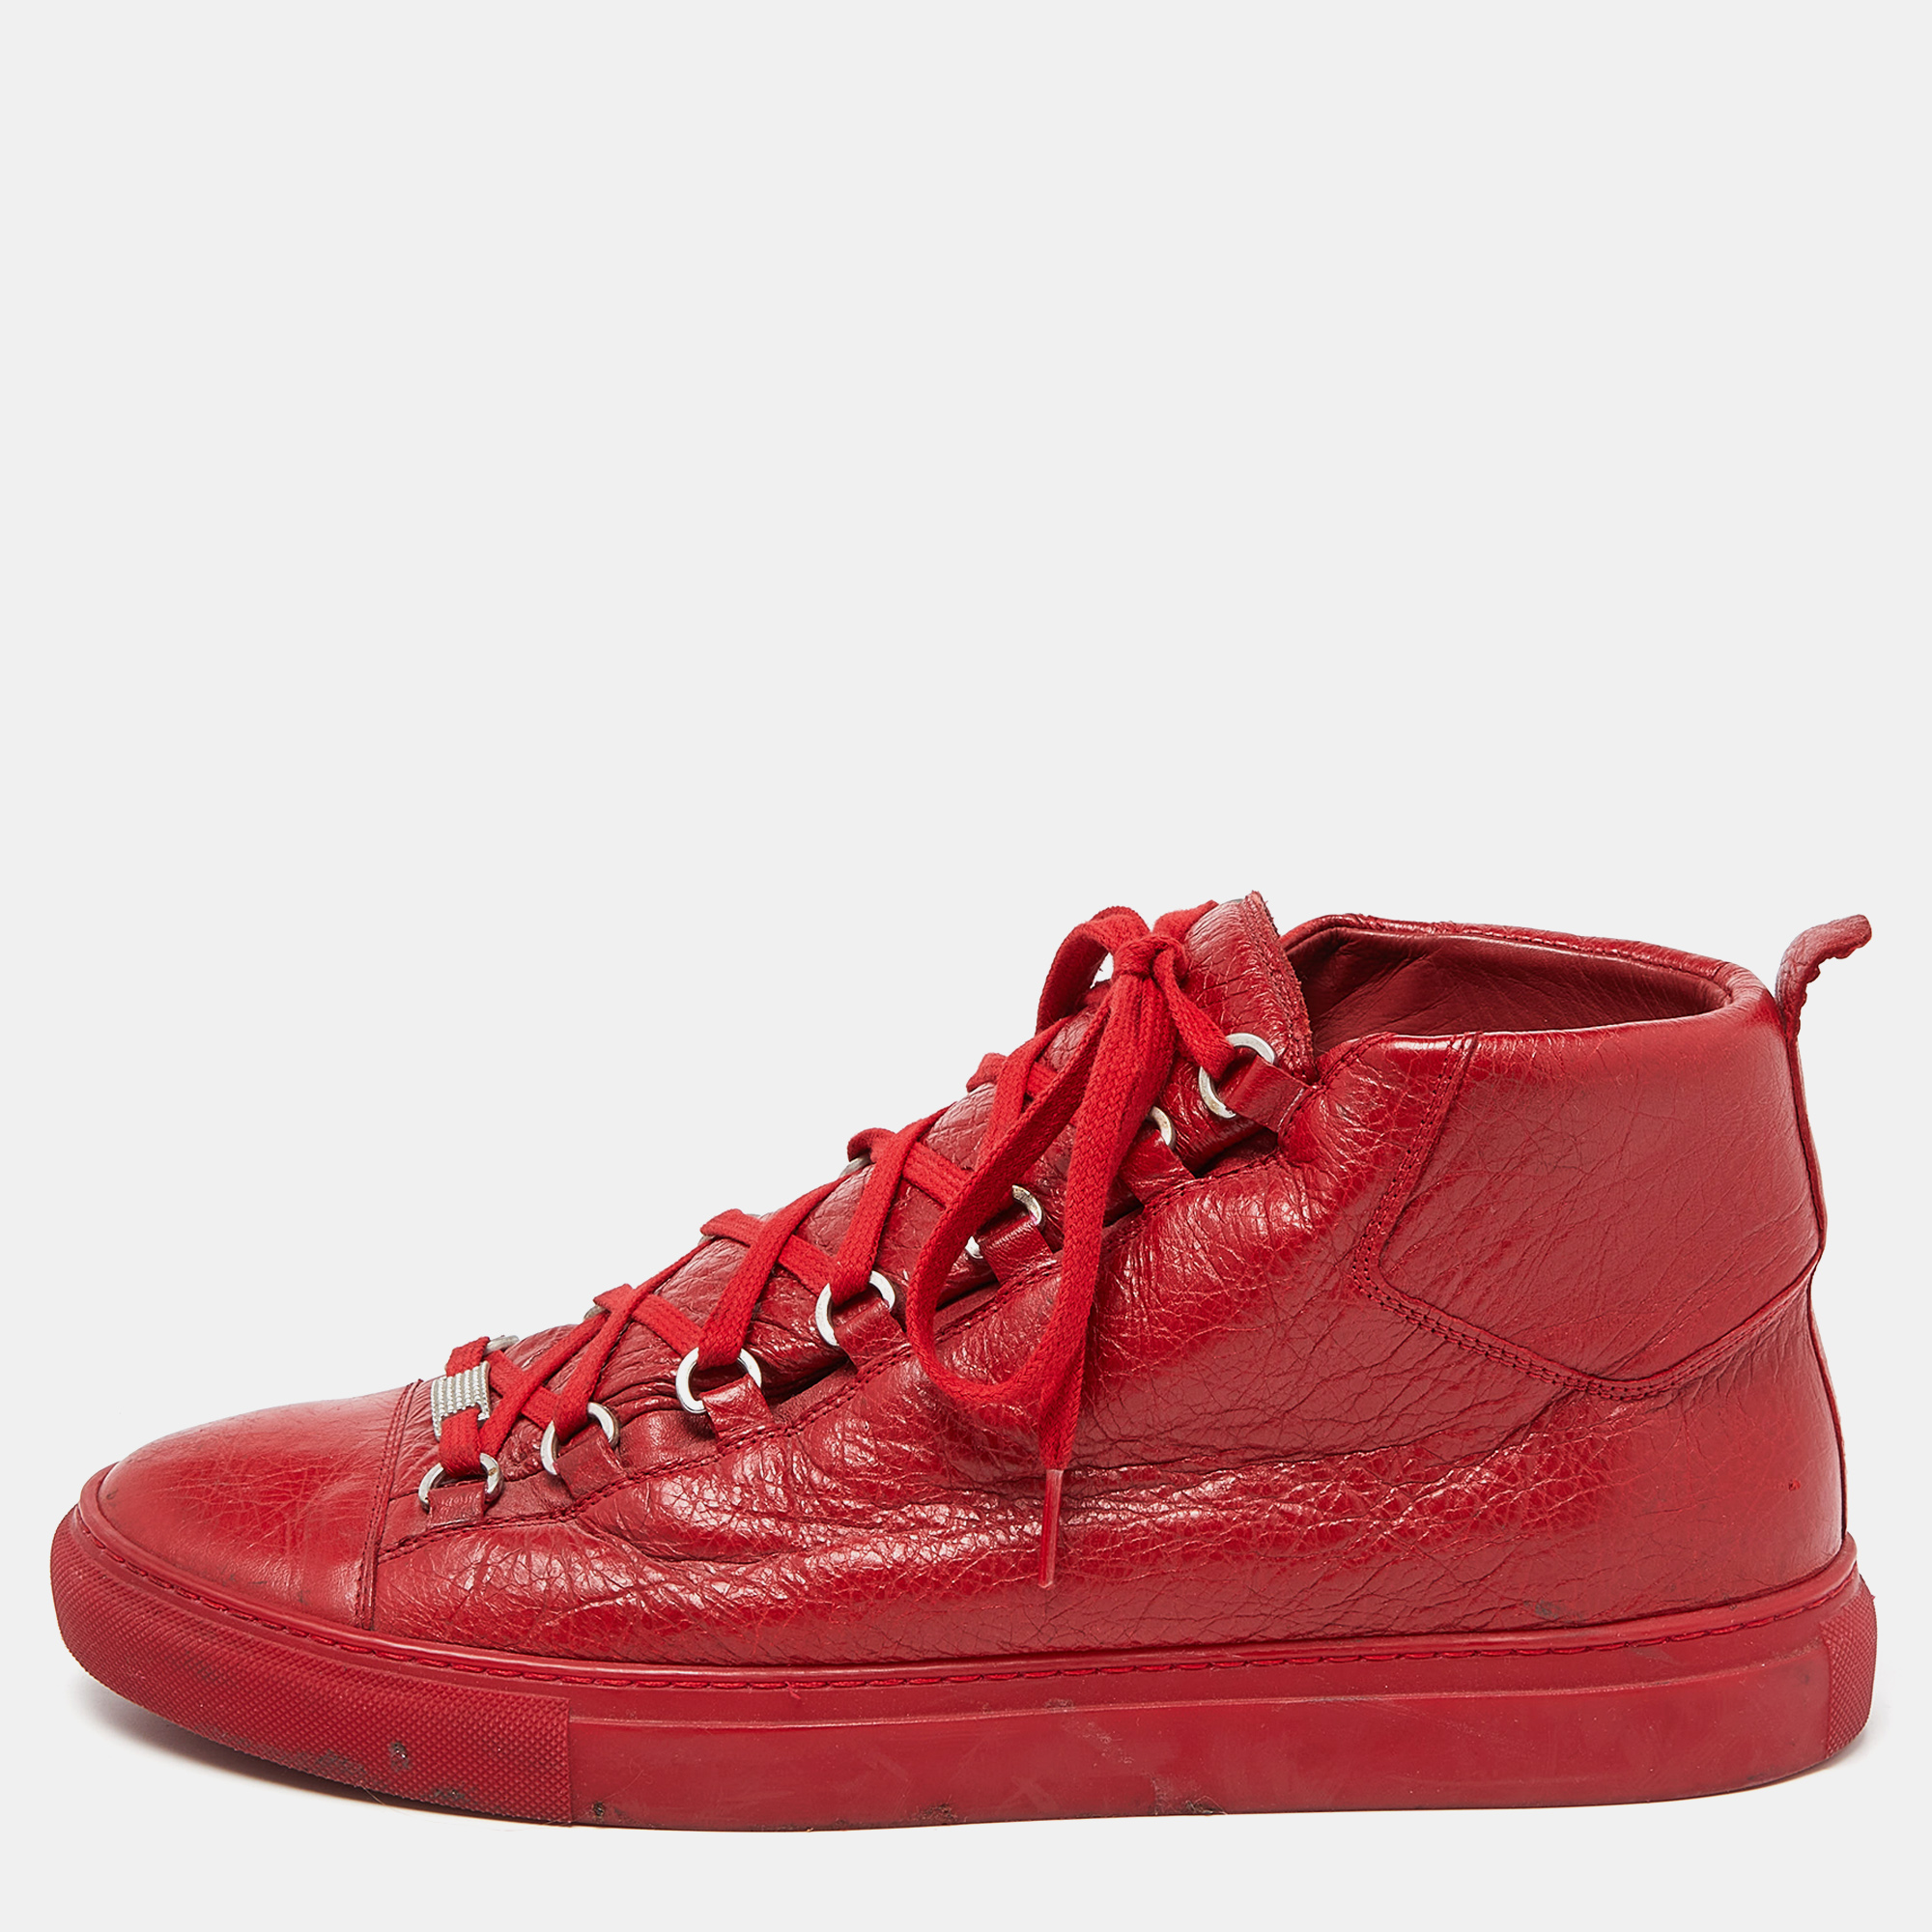 Pre-owned Balenciaga Red Textured Leather Arena High Top Sneakers Size 45